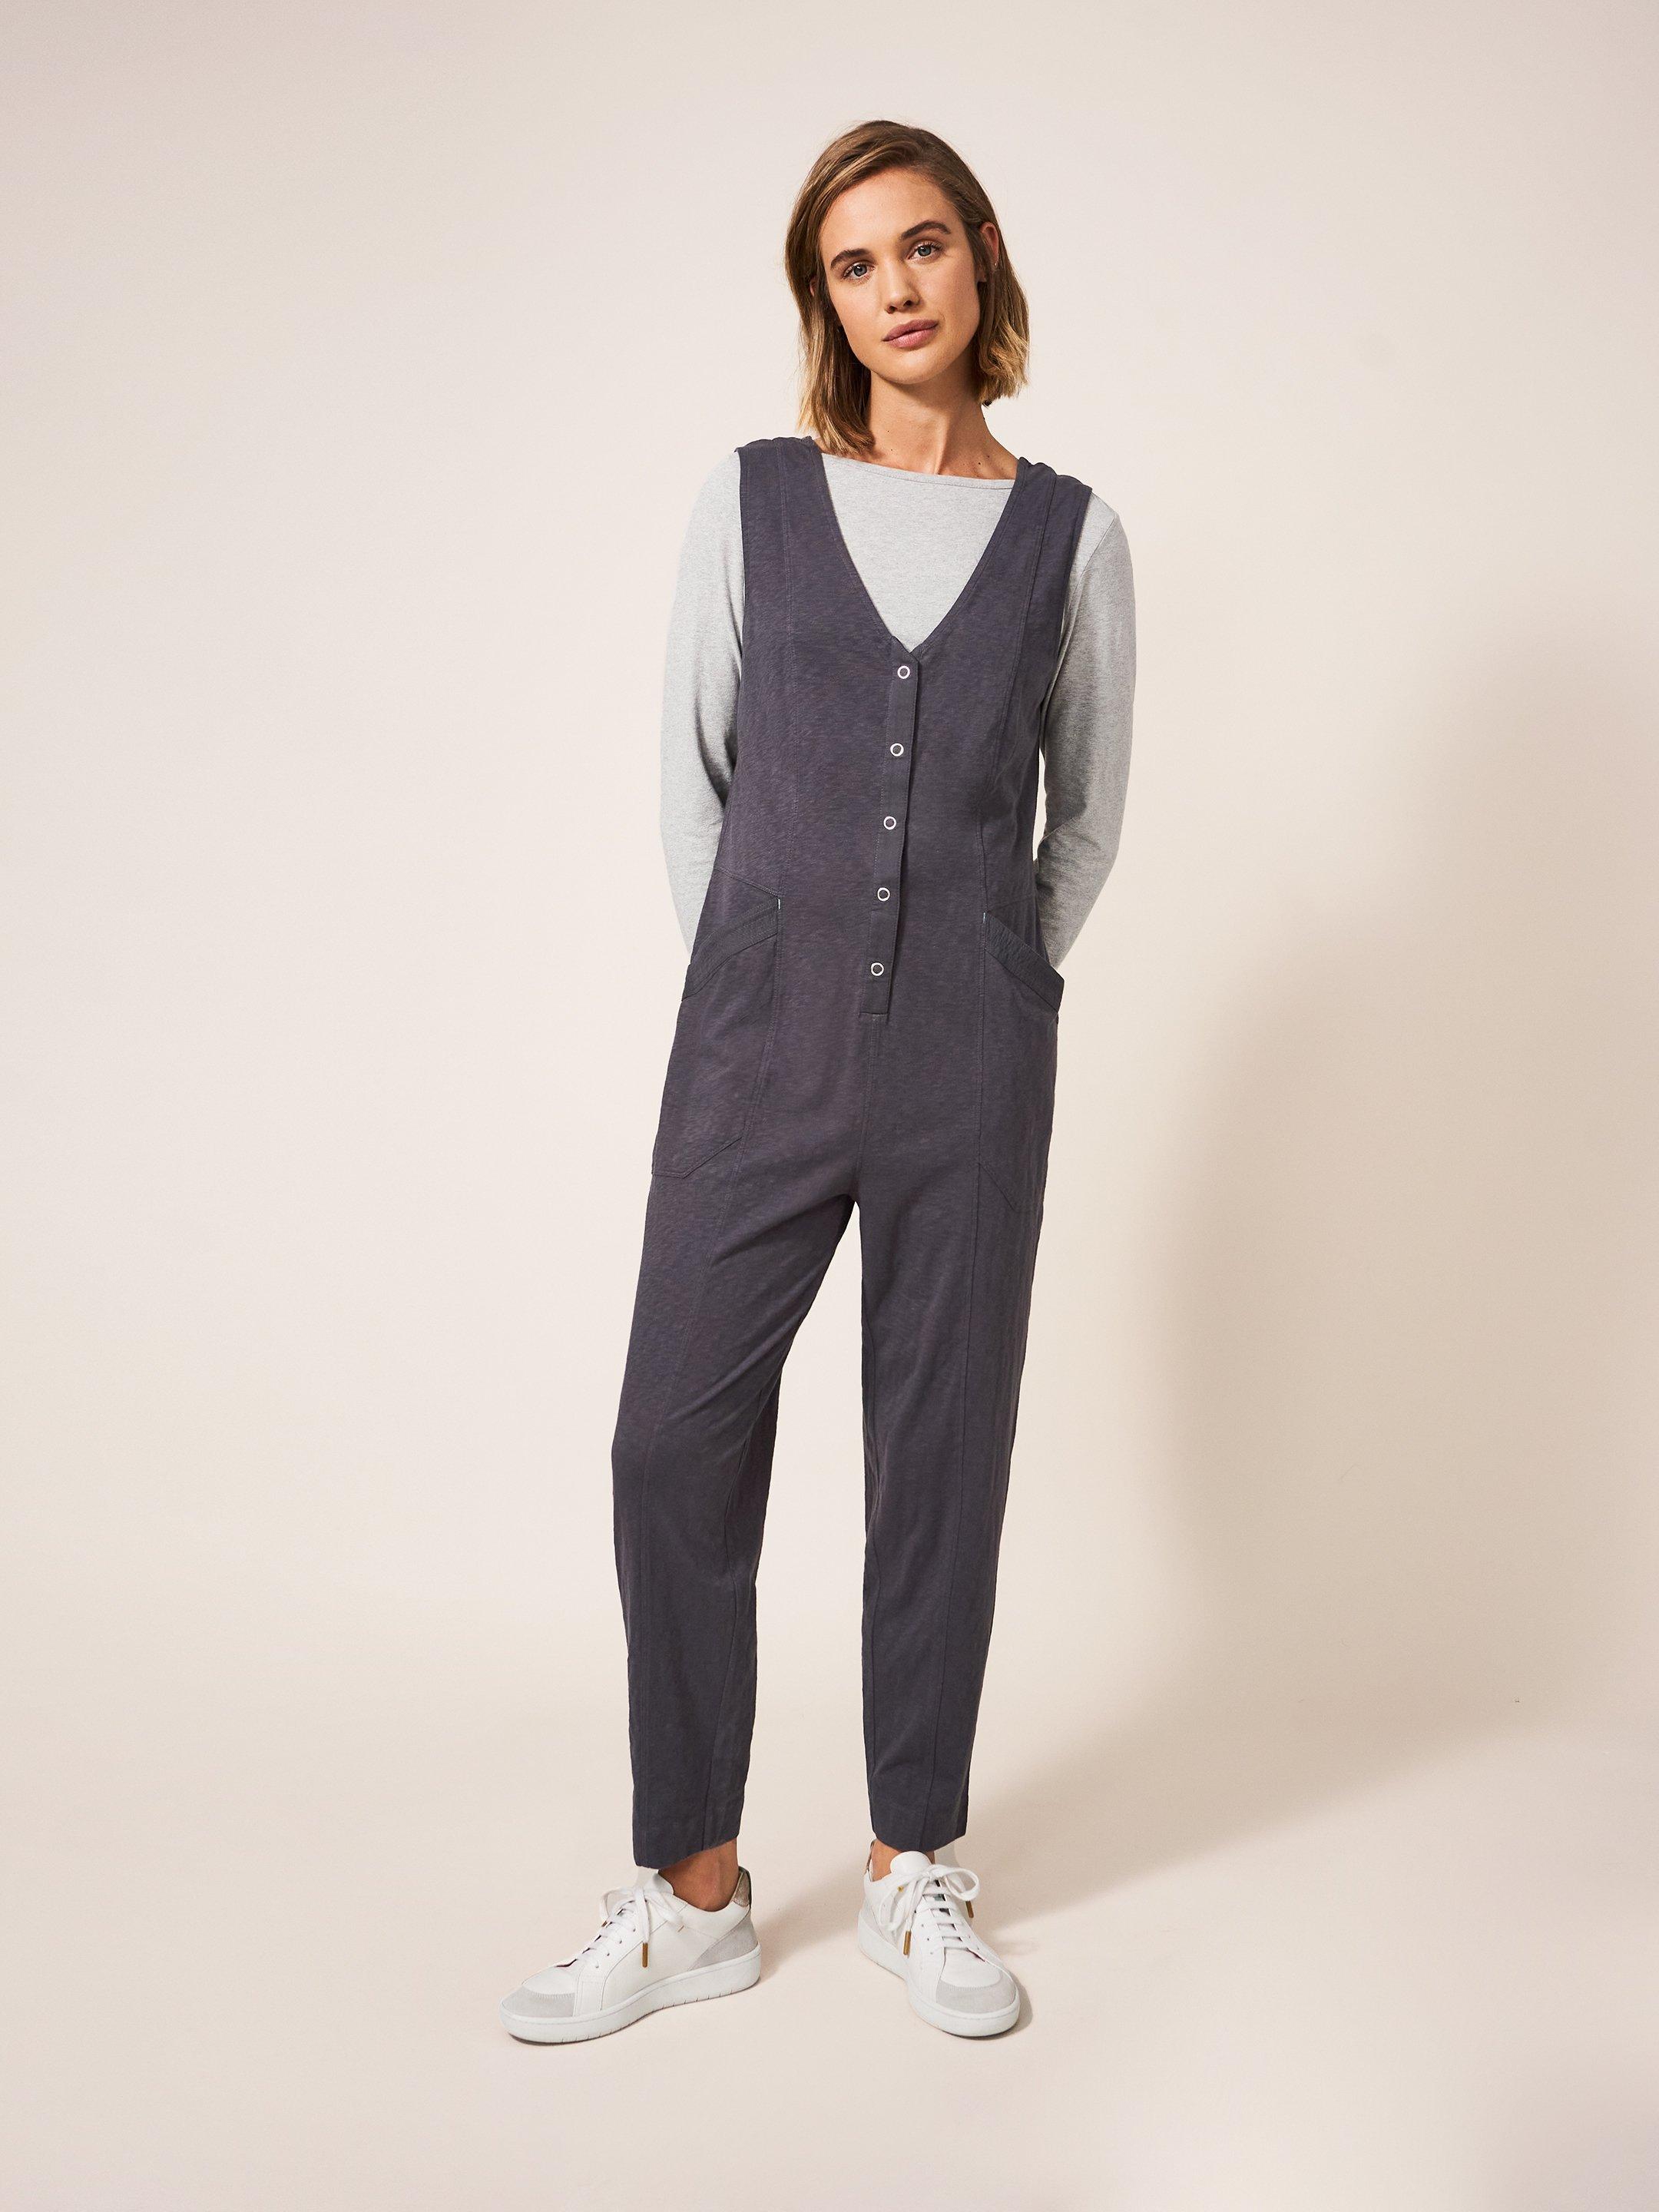 Isla Jersey Jumpsuit in CHARC GREY - LIFESTYLE